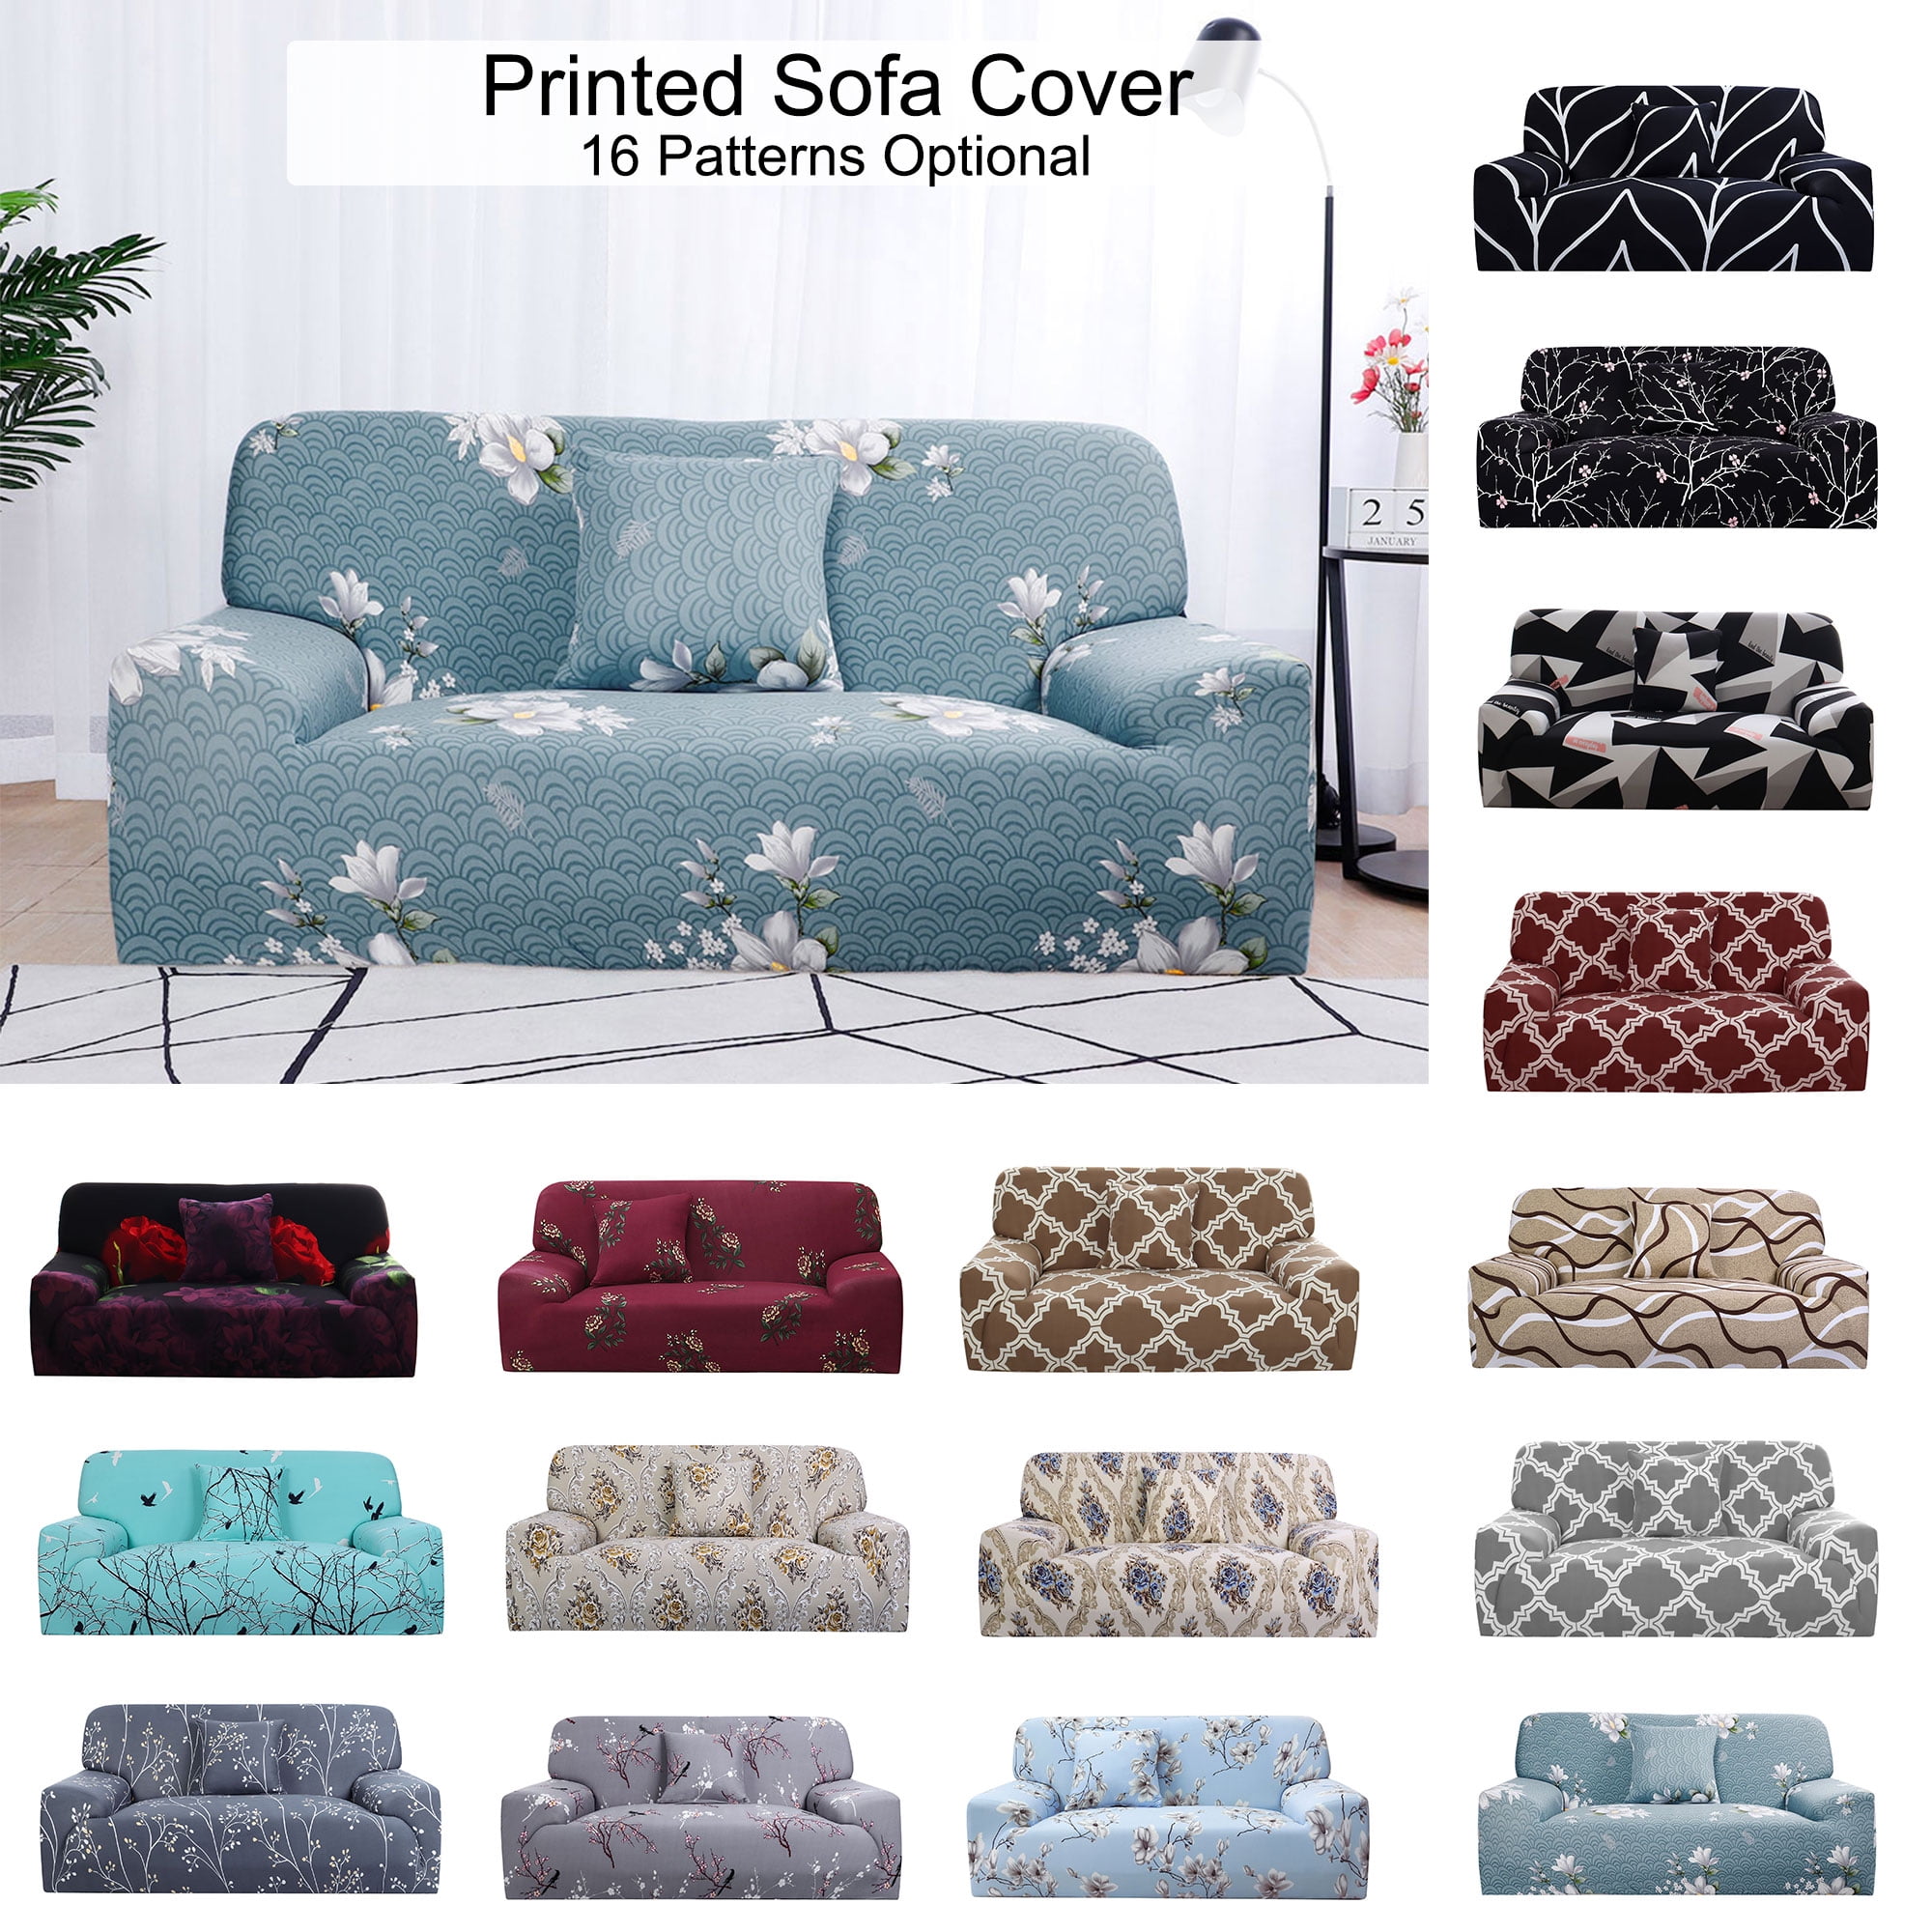 Two 3 seater elasticated slipcovers 